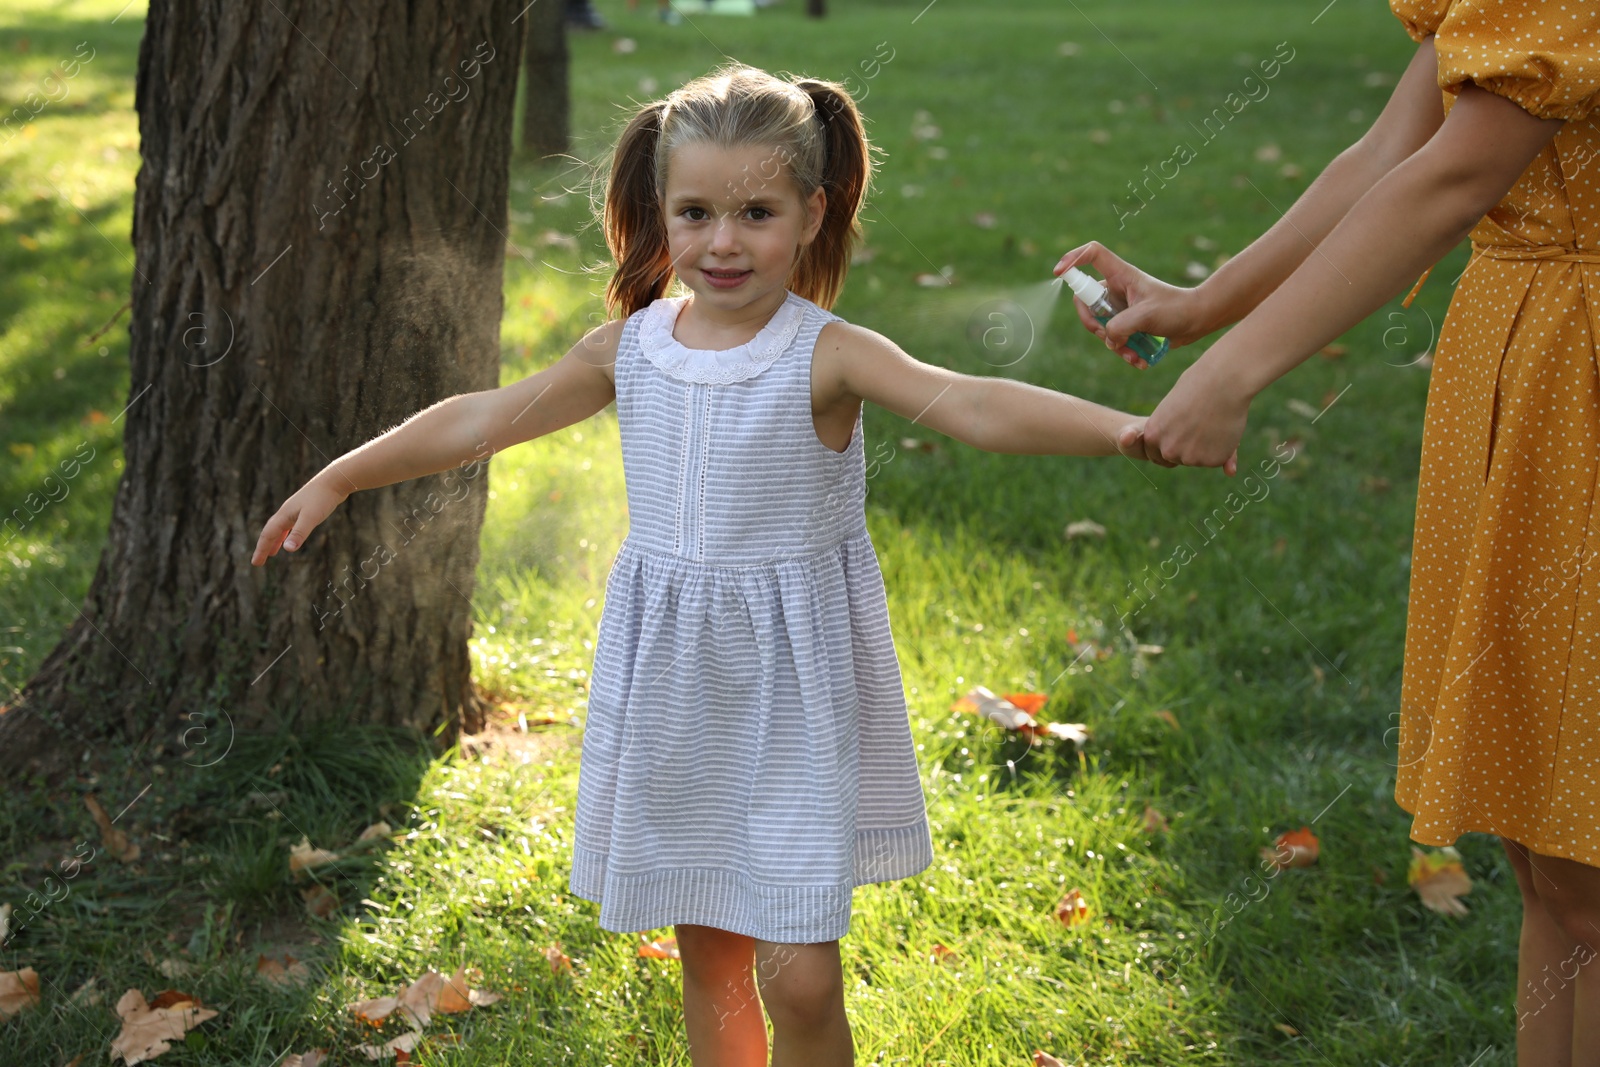 Photo of Mother applying insect repellent onto girl's hand in park